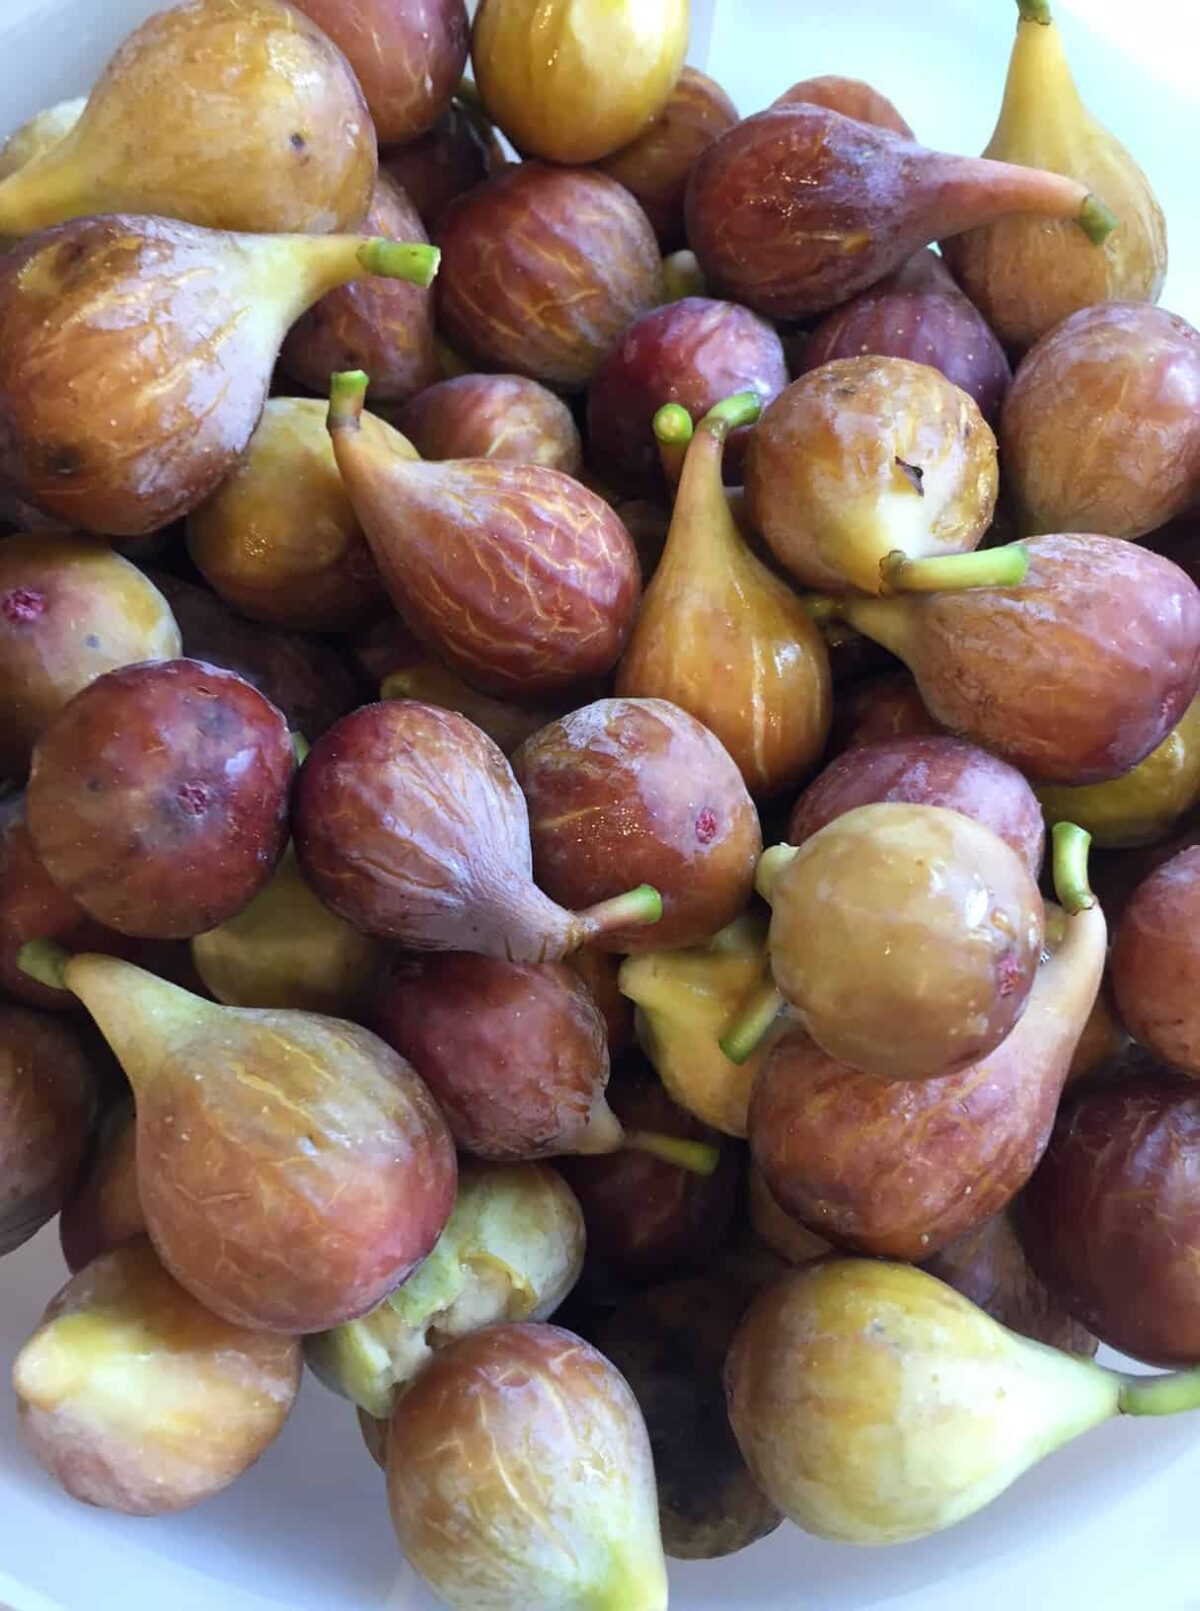 A pile of fresh figs.